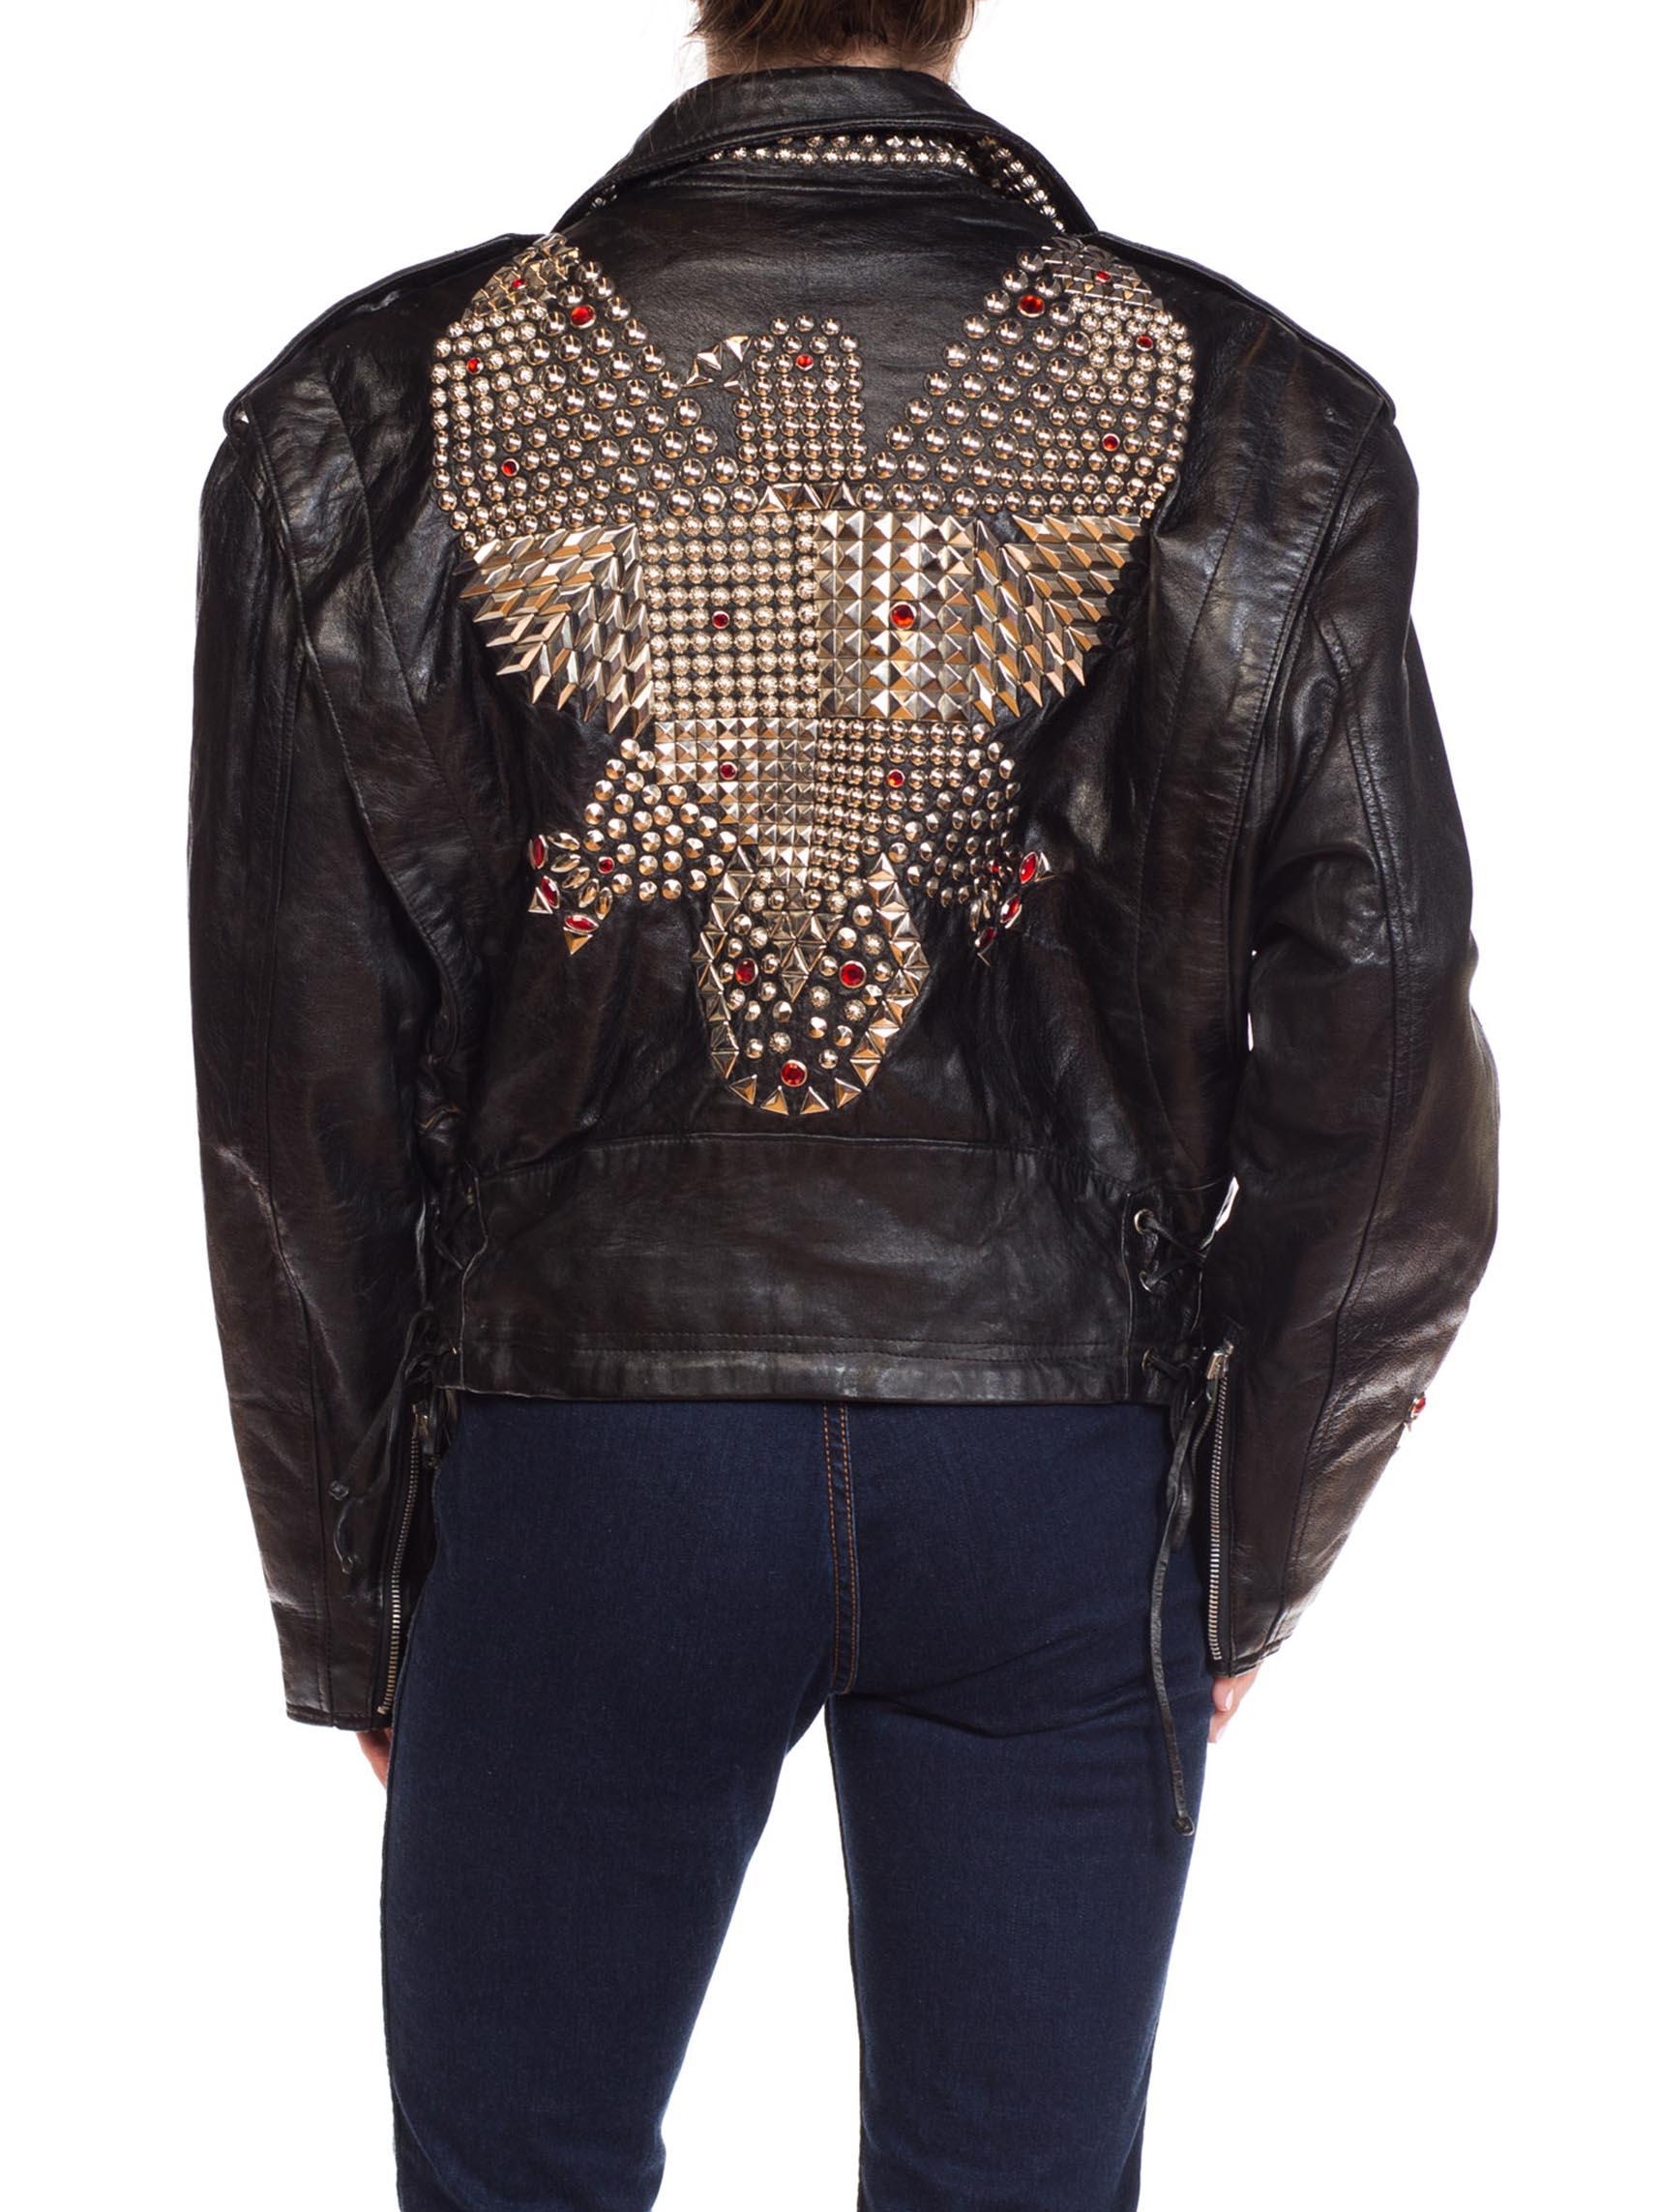 1990S JEFF HAMILTON Men's Studded Leather Biker Jacket With Crystals And Eagle For Sale 1